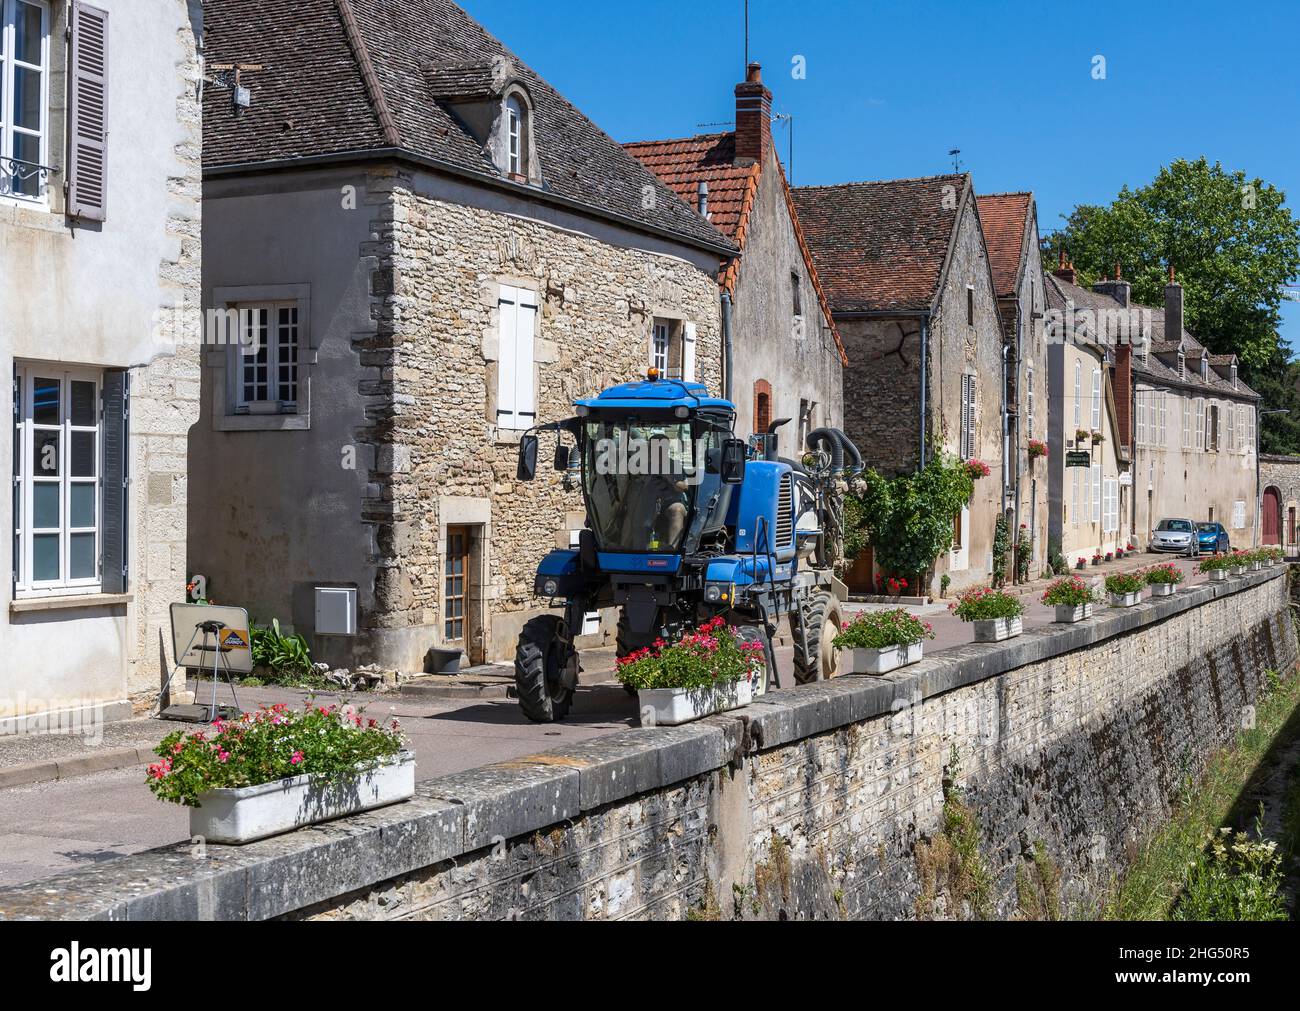 Volnay, France - June 30, 2020: Machine used on the vineyards in burgundy in picturesque village, France. Stock Photo